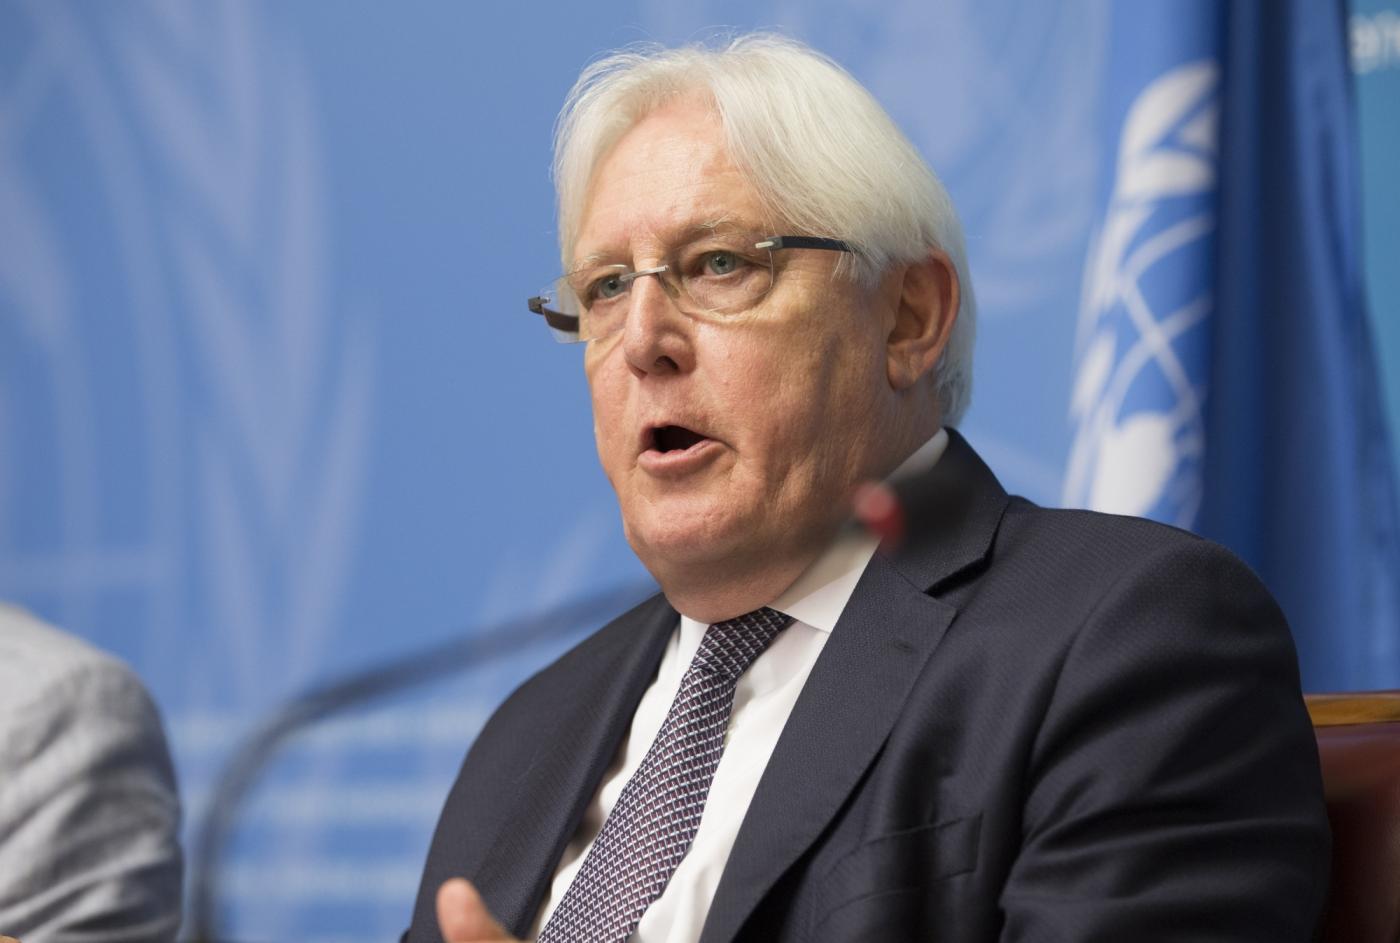 GENEVA, Sept. 5, 2018 (Xinhua) -- UN Special Envoy of the Secretary-General for Yemen Martin Griffiths addresses the media in Geneva, Switzerland, Sept. 5, 2018. Martin Griffiths on Wednesday announced here that warring parties in Yemen are scheduled to participate a new round of peace talks in Geneva to end the four-year conflict engulfing the country. (Xinhua/Xu Jinquan/IANS) by .